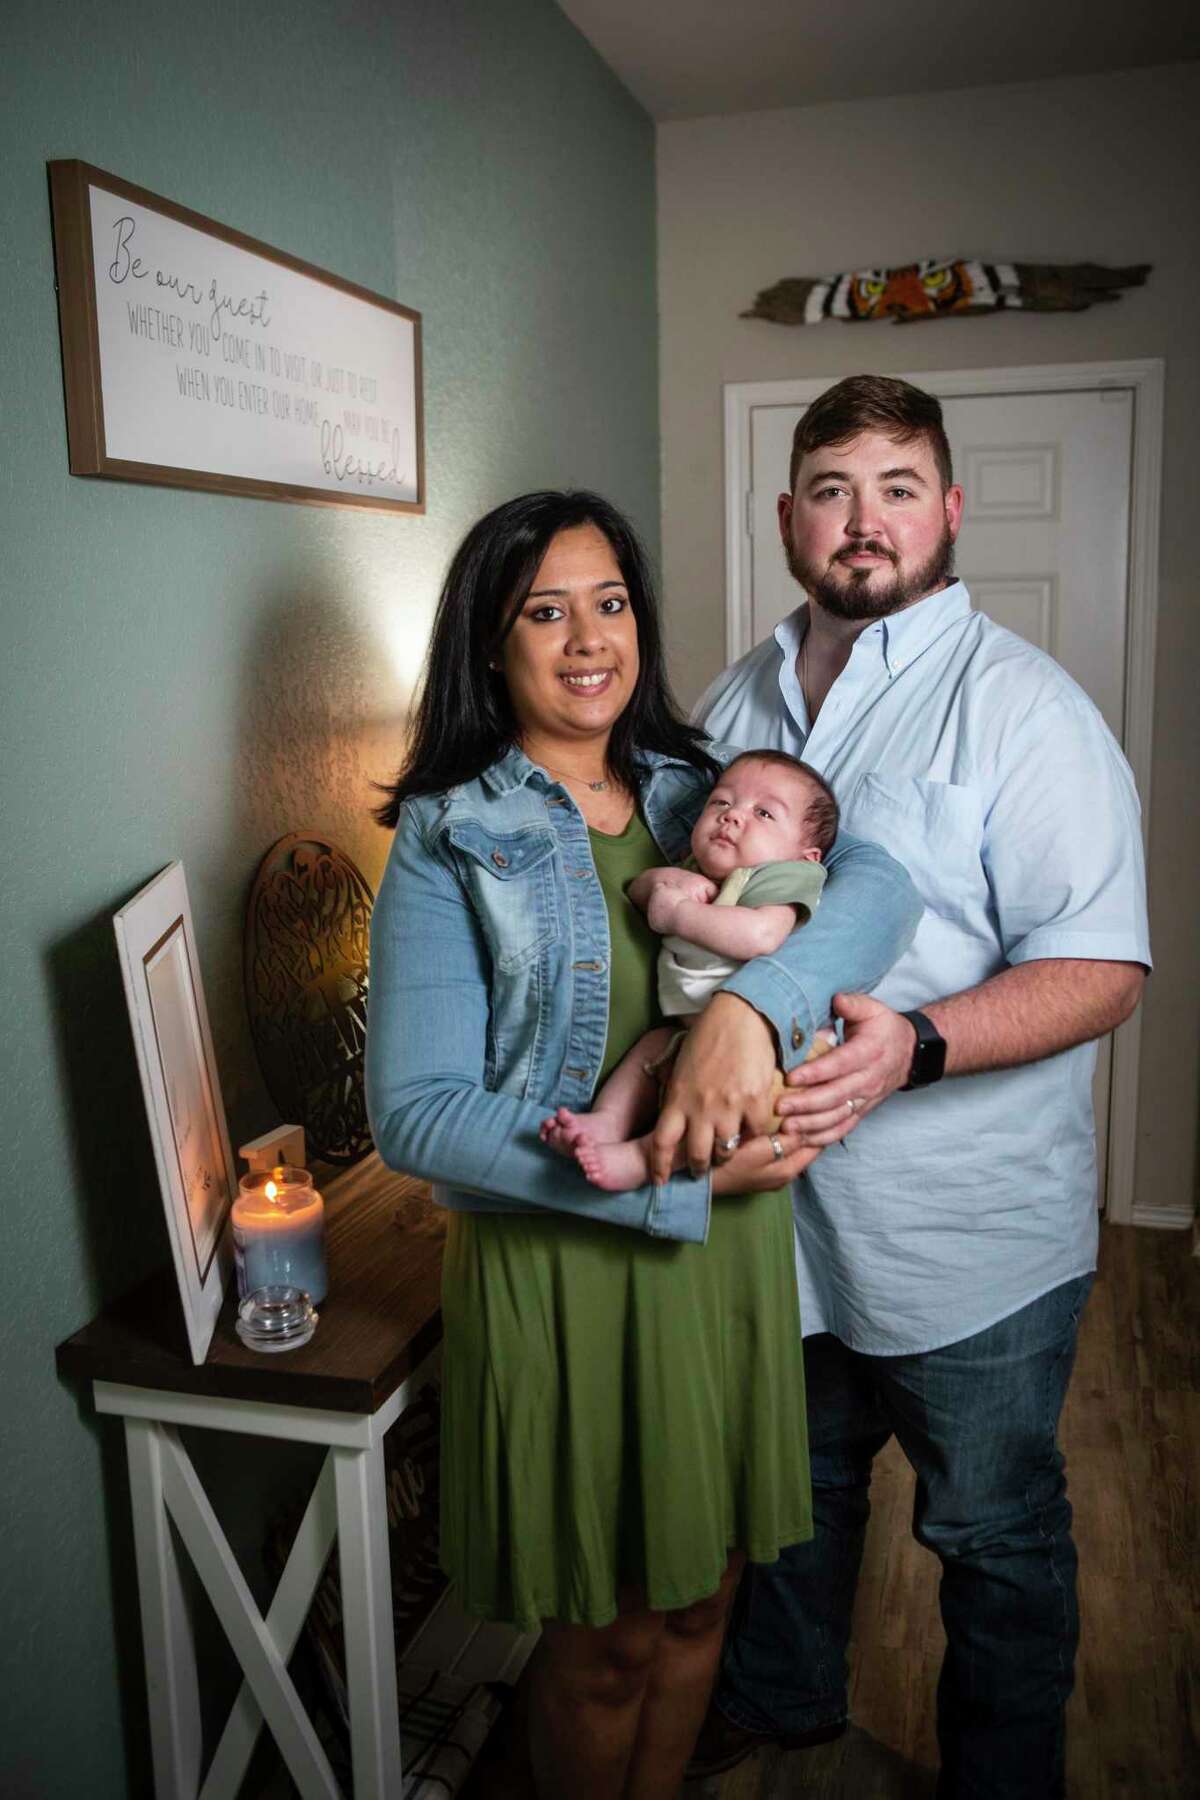 Juno and James Evans hold 3-month-old son Jaxson. Juno was pregnant when she learned that she needed surgery to fix a congenital heart defect.